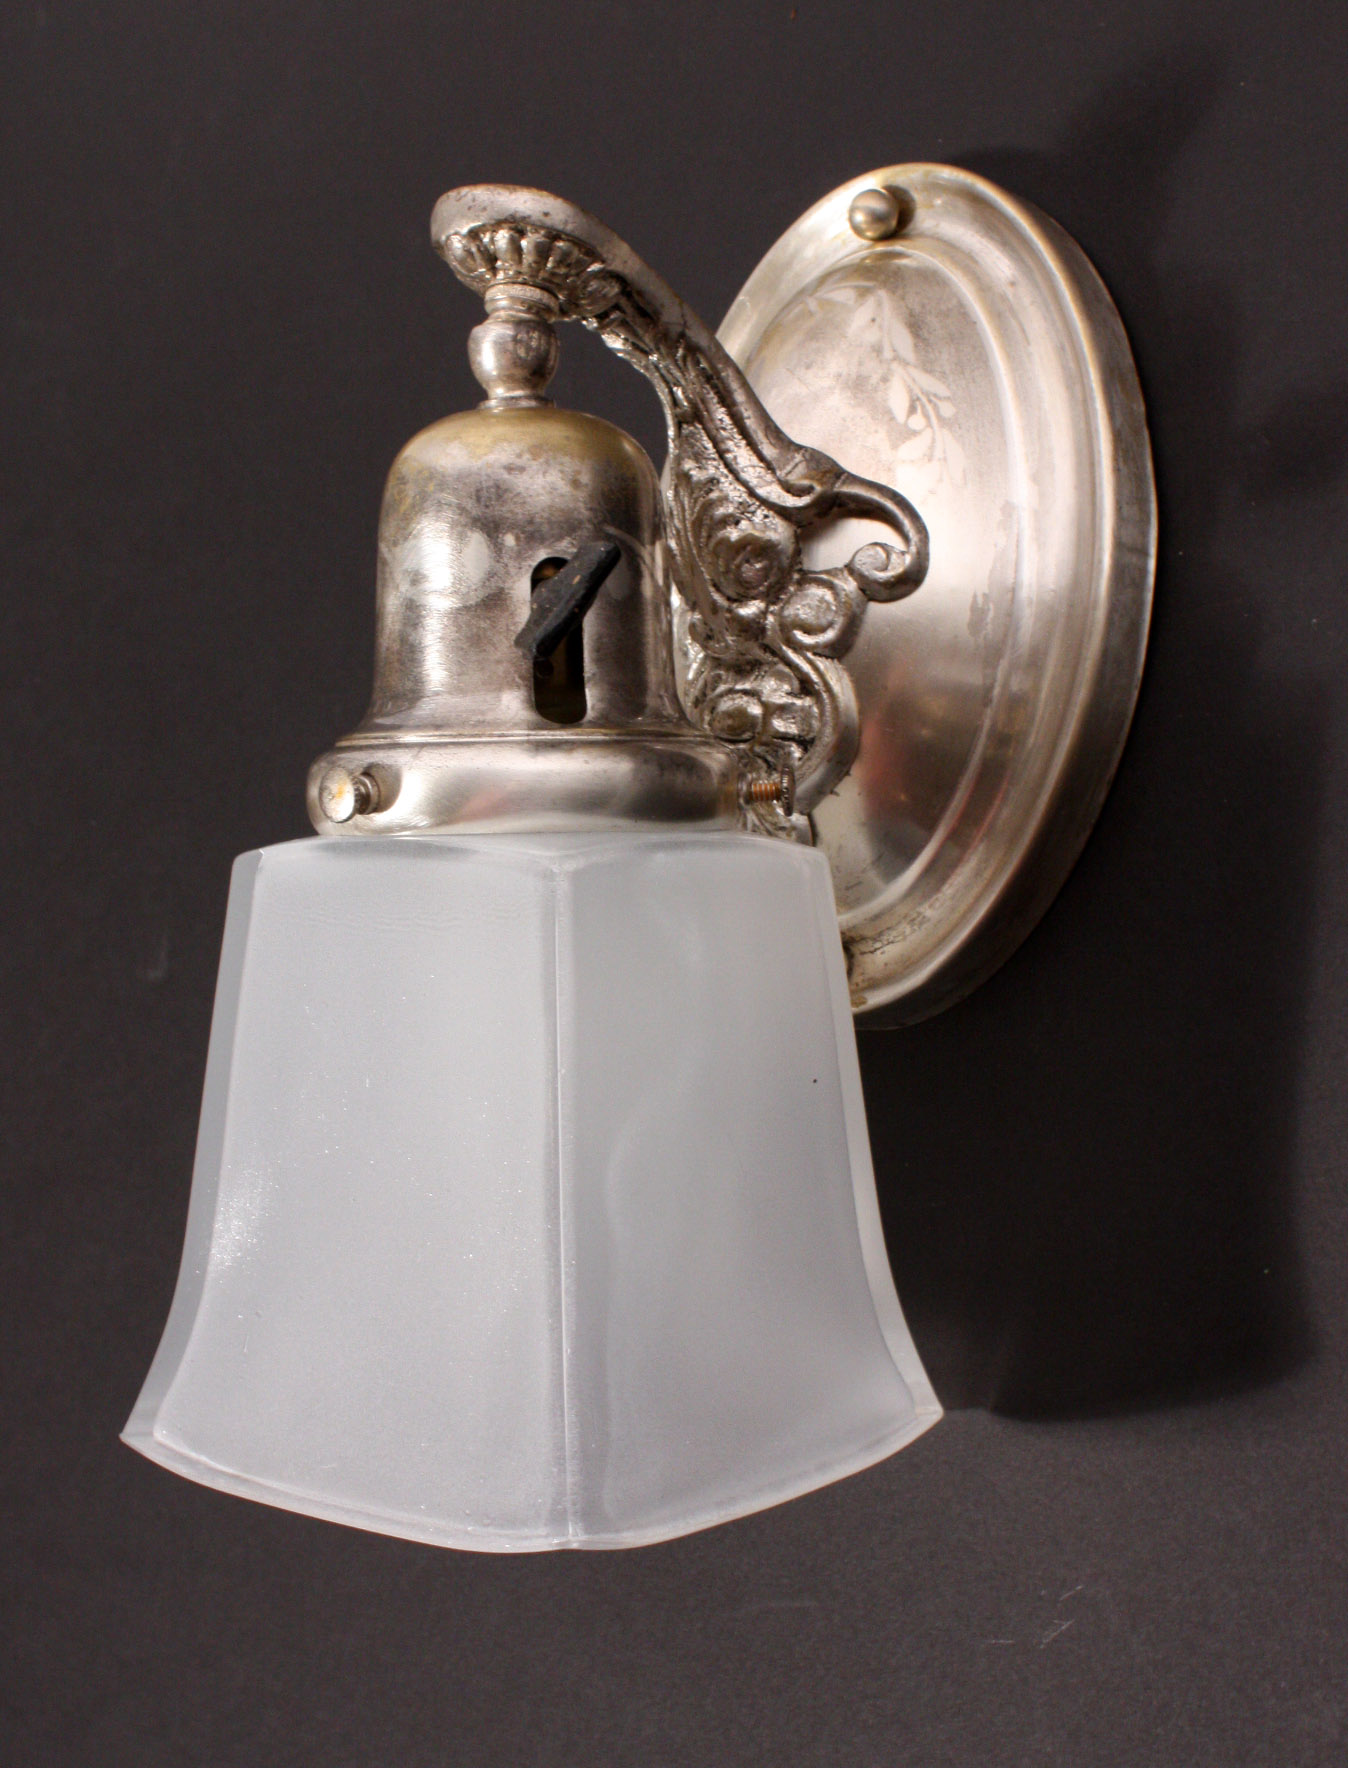 SOLD Beautiful Pair of Antique Single-Arm Sconces, Silver Plate, c. 1910-18674